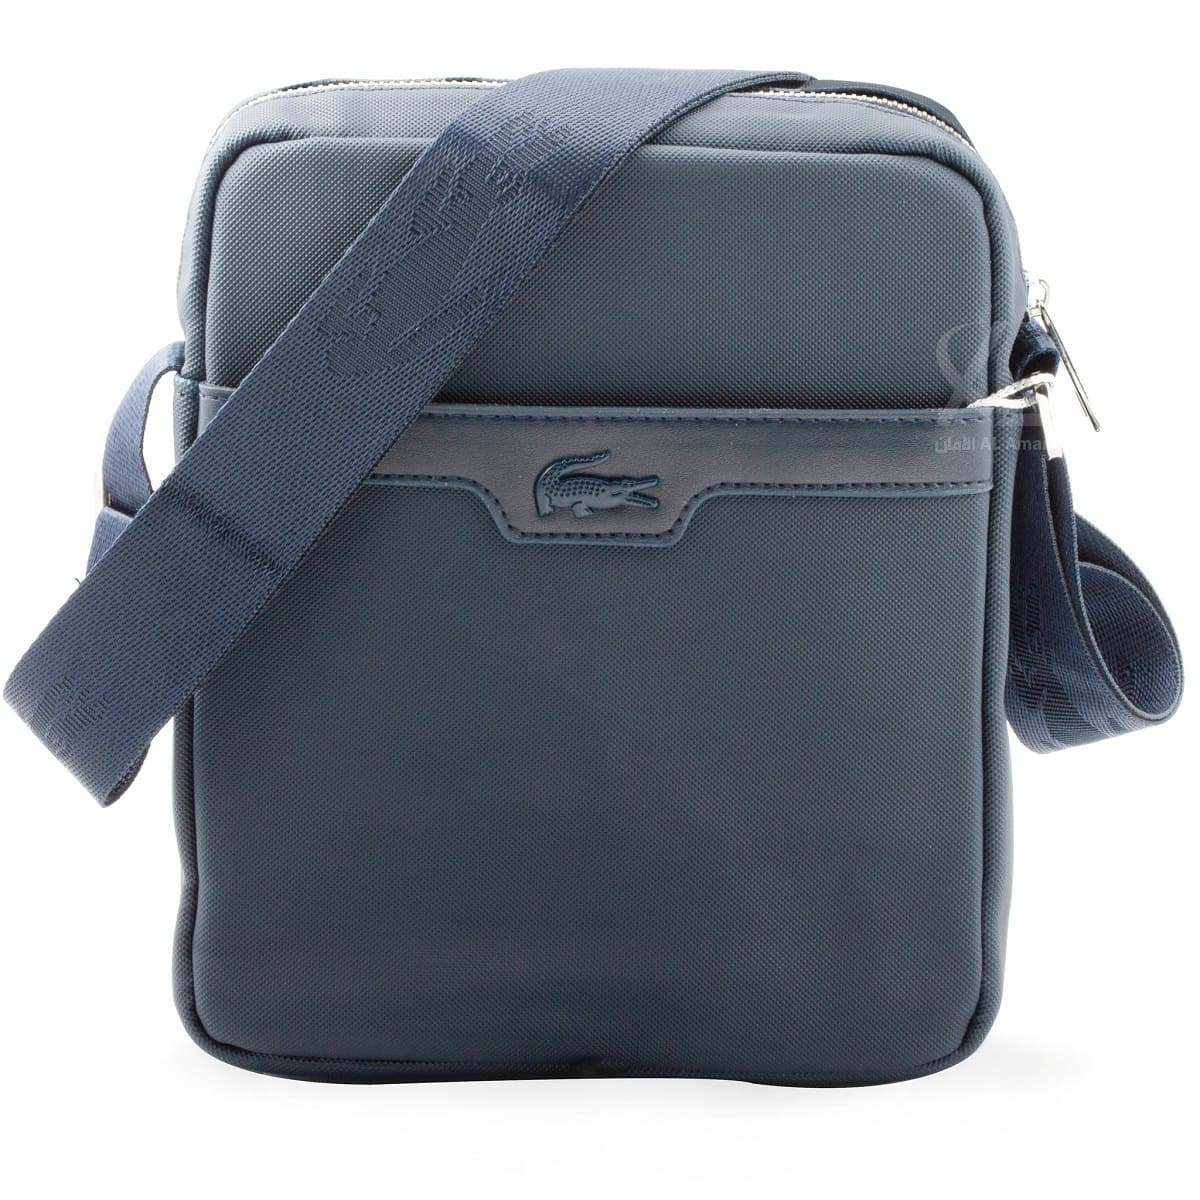 Lacoste-crossbag-with-hand-blue-color-leather-men's-bag